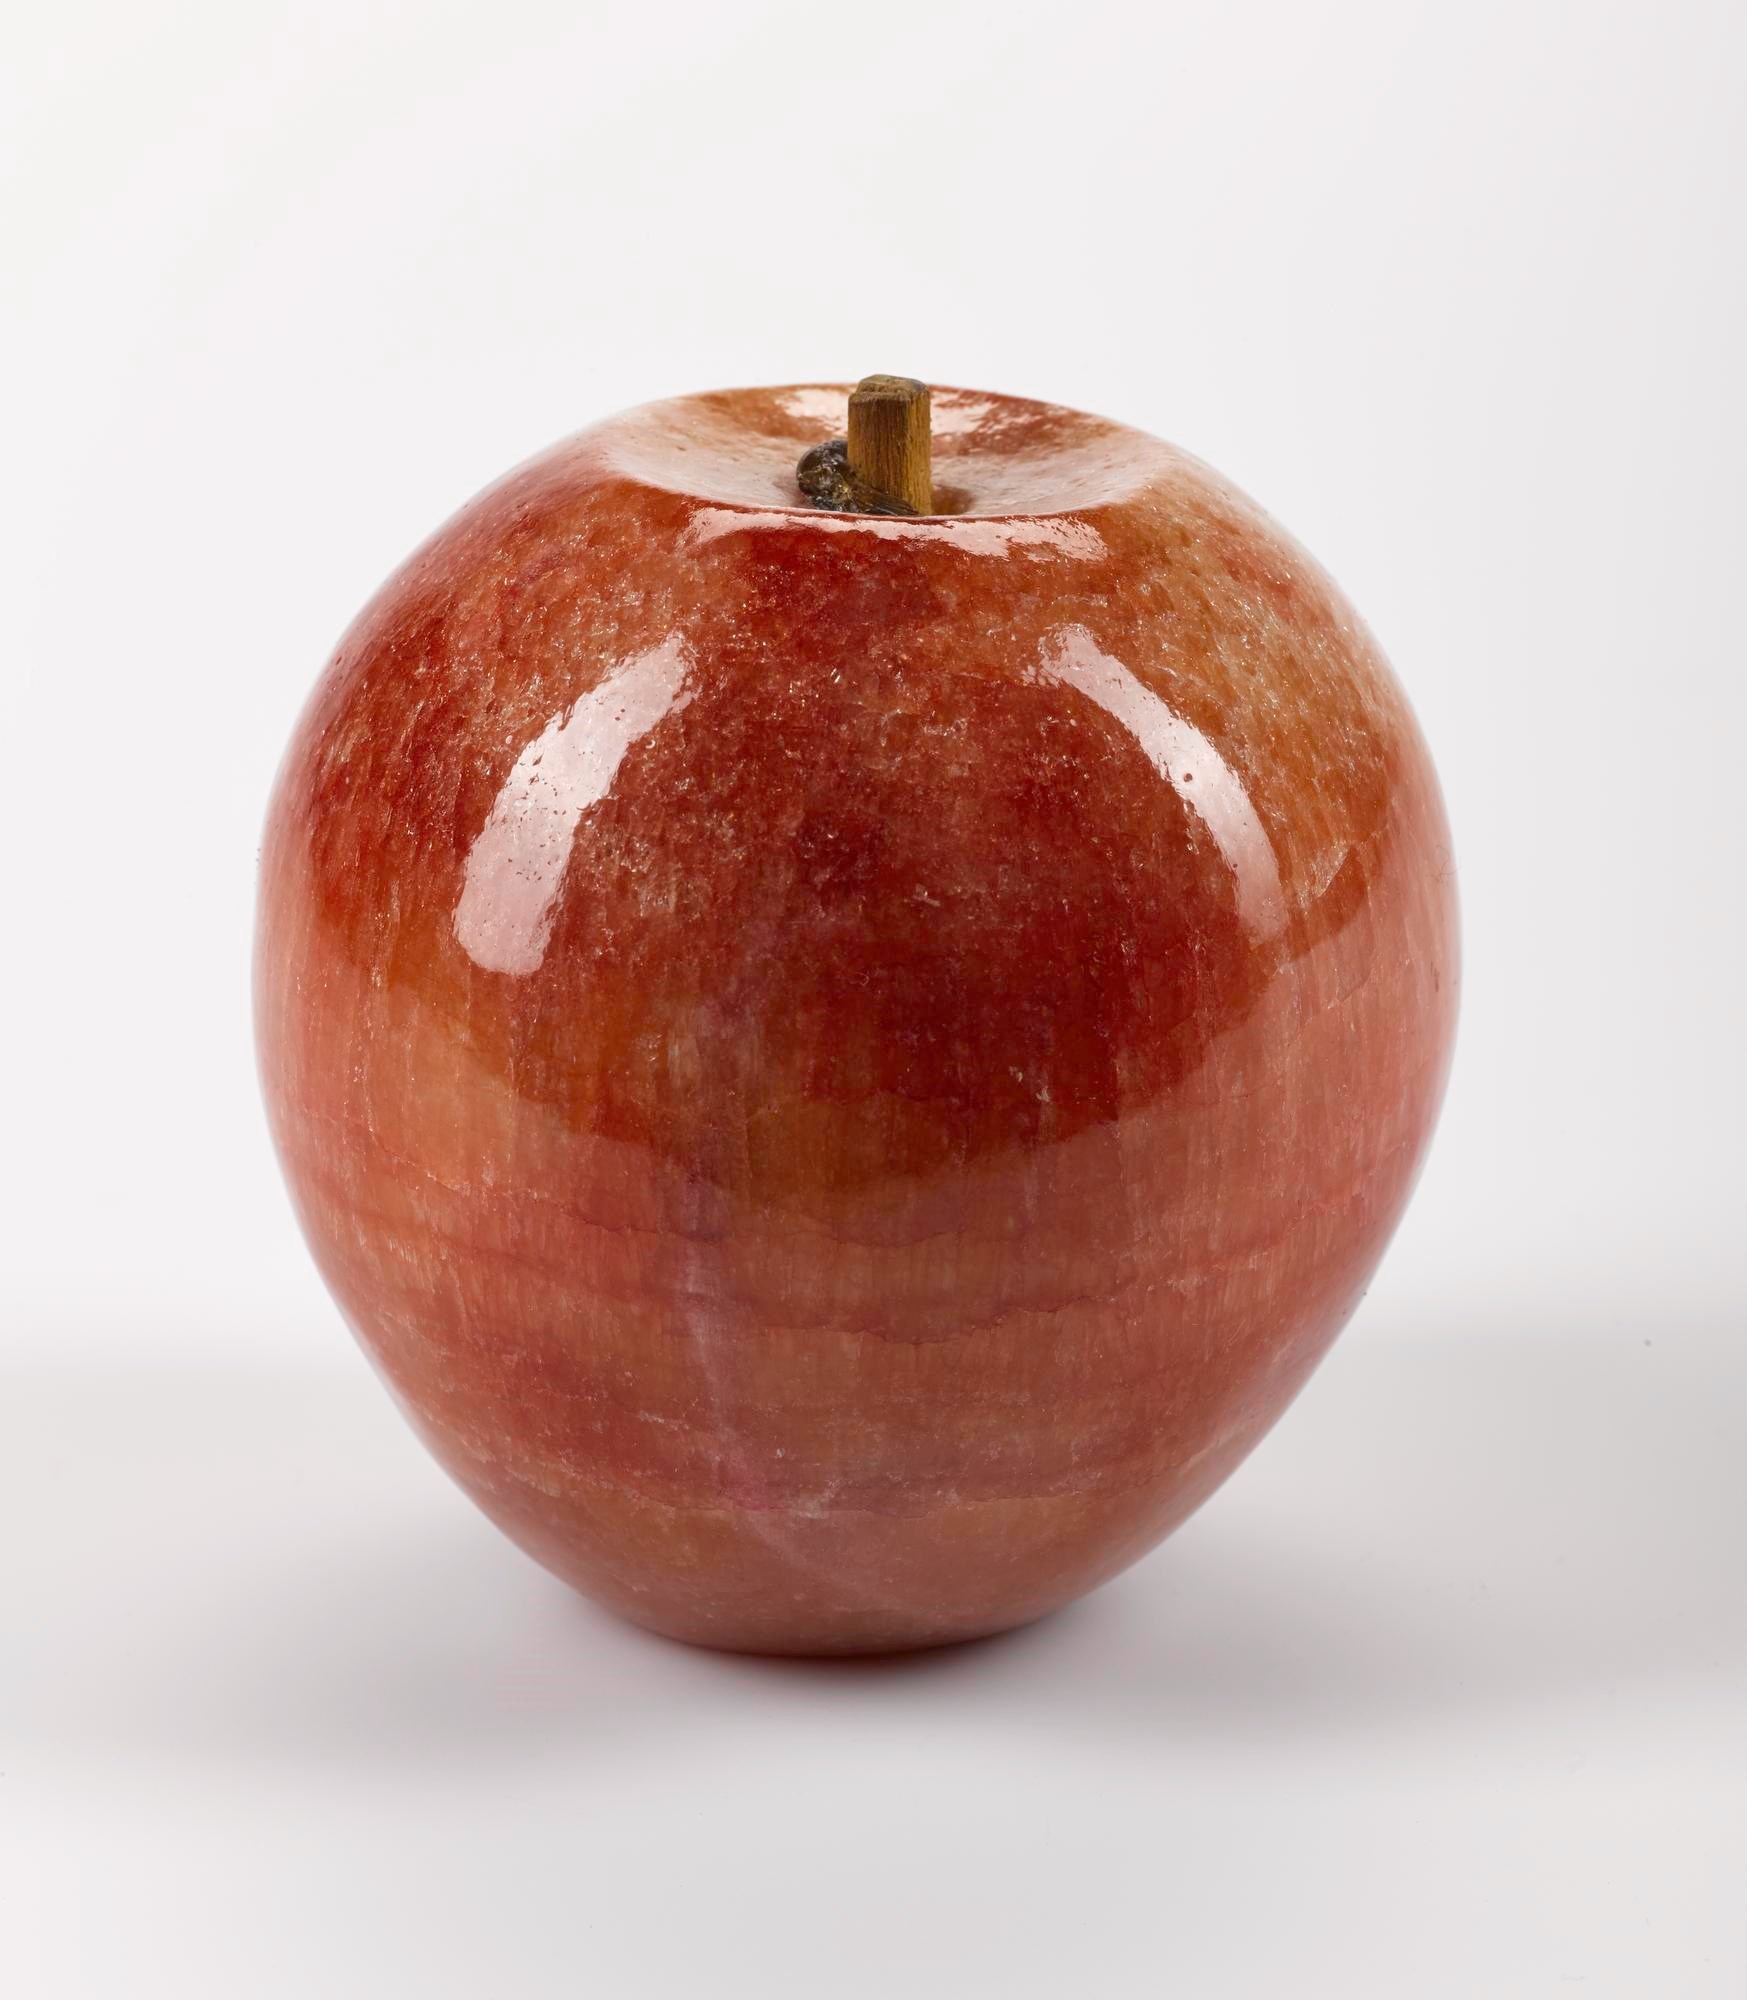 A very shiny red apple, so perfect it almost looks fake, against a white background.